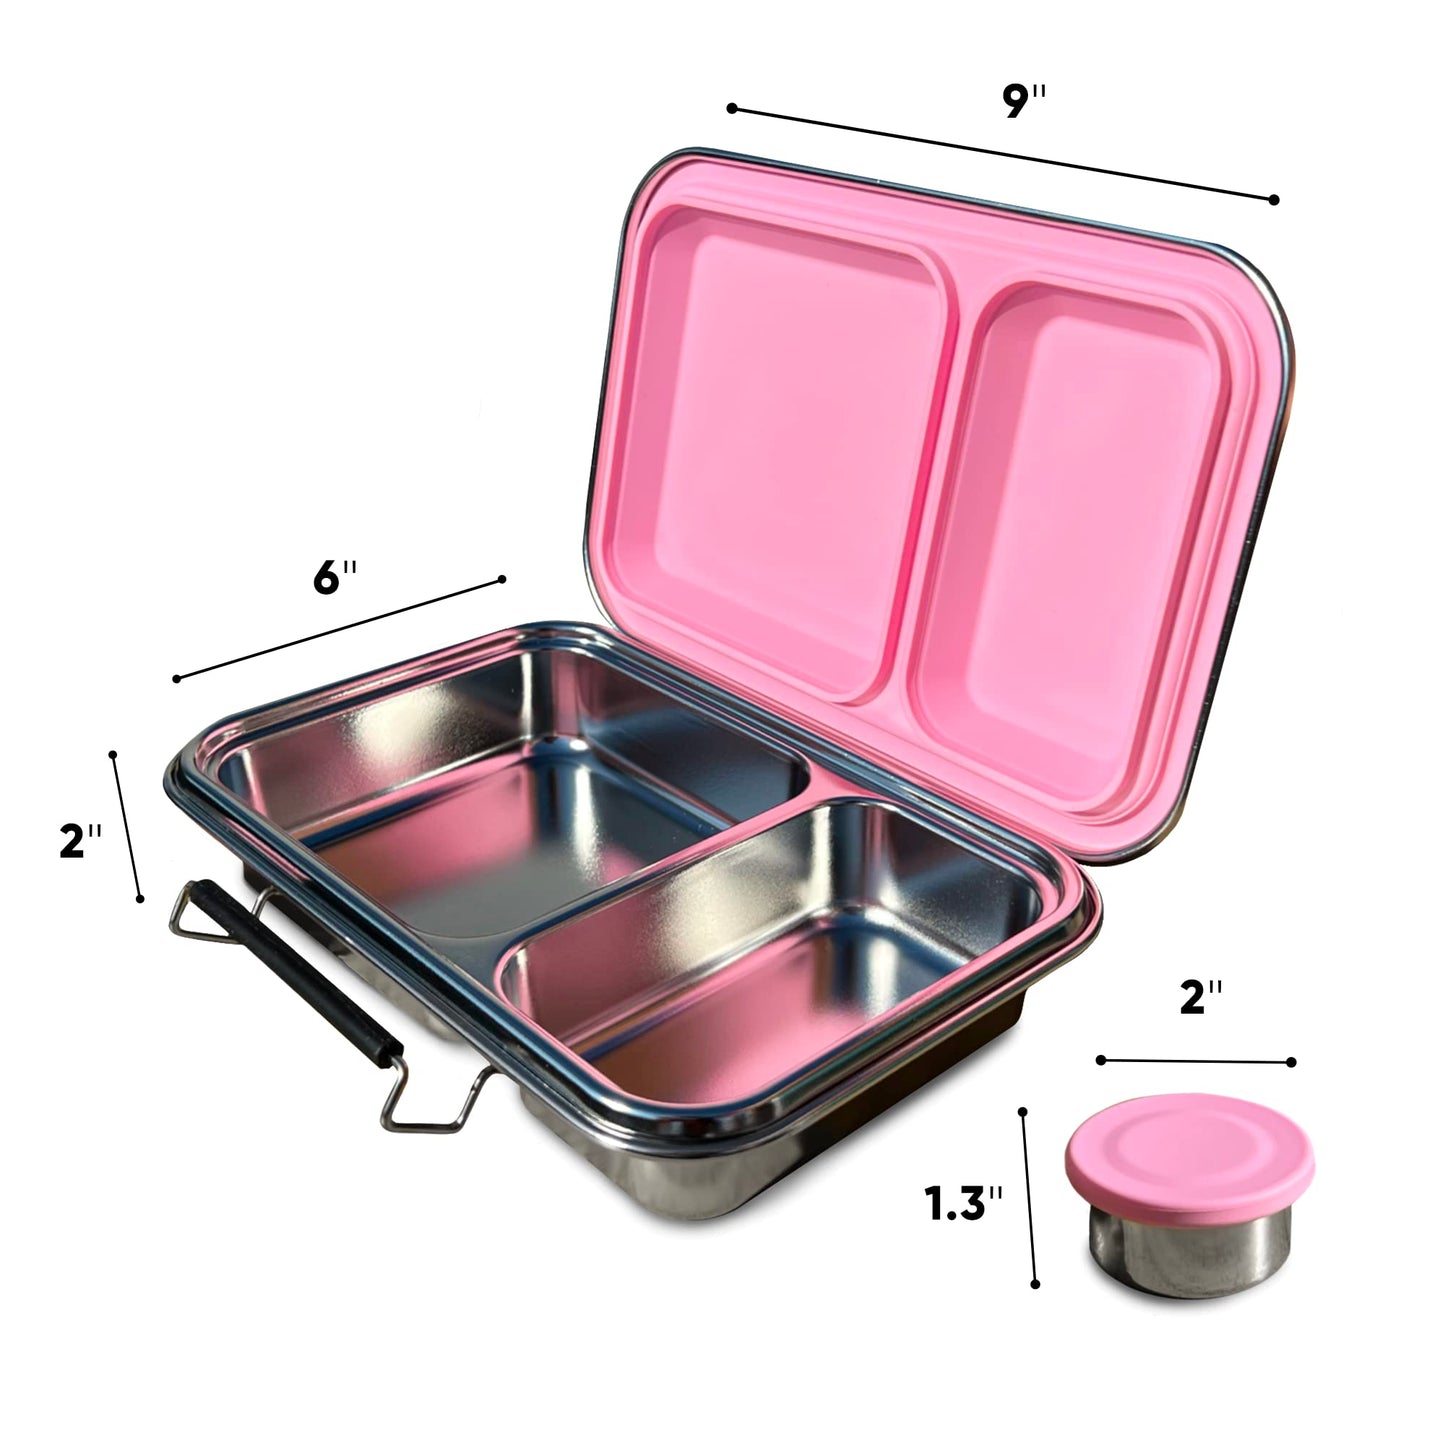 Stainless Steel Lunch Container and Dip Container - Premium Metal Bento Box - Stainless Steel Food Container with 2 Compartments - Modern Leakproof Snack Lunch Set (Pink)